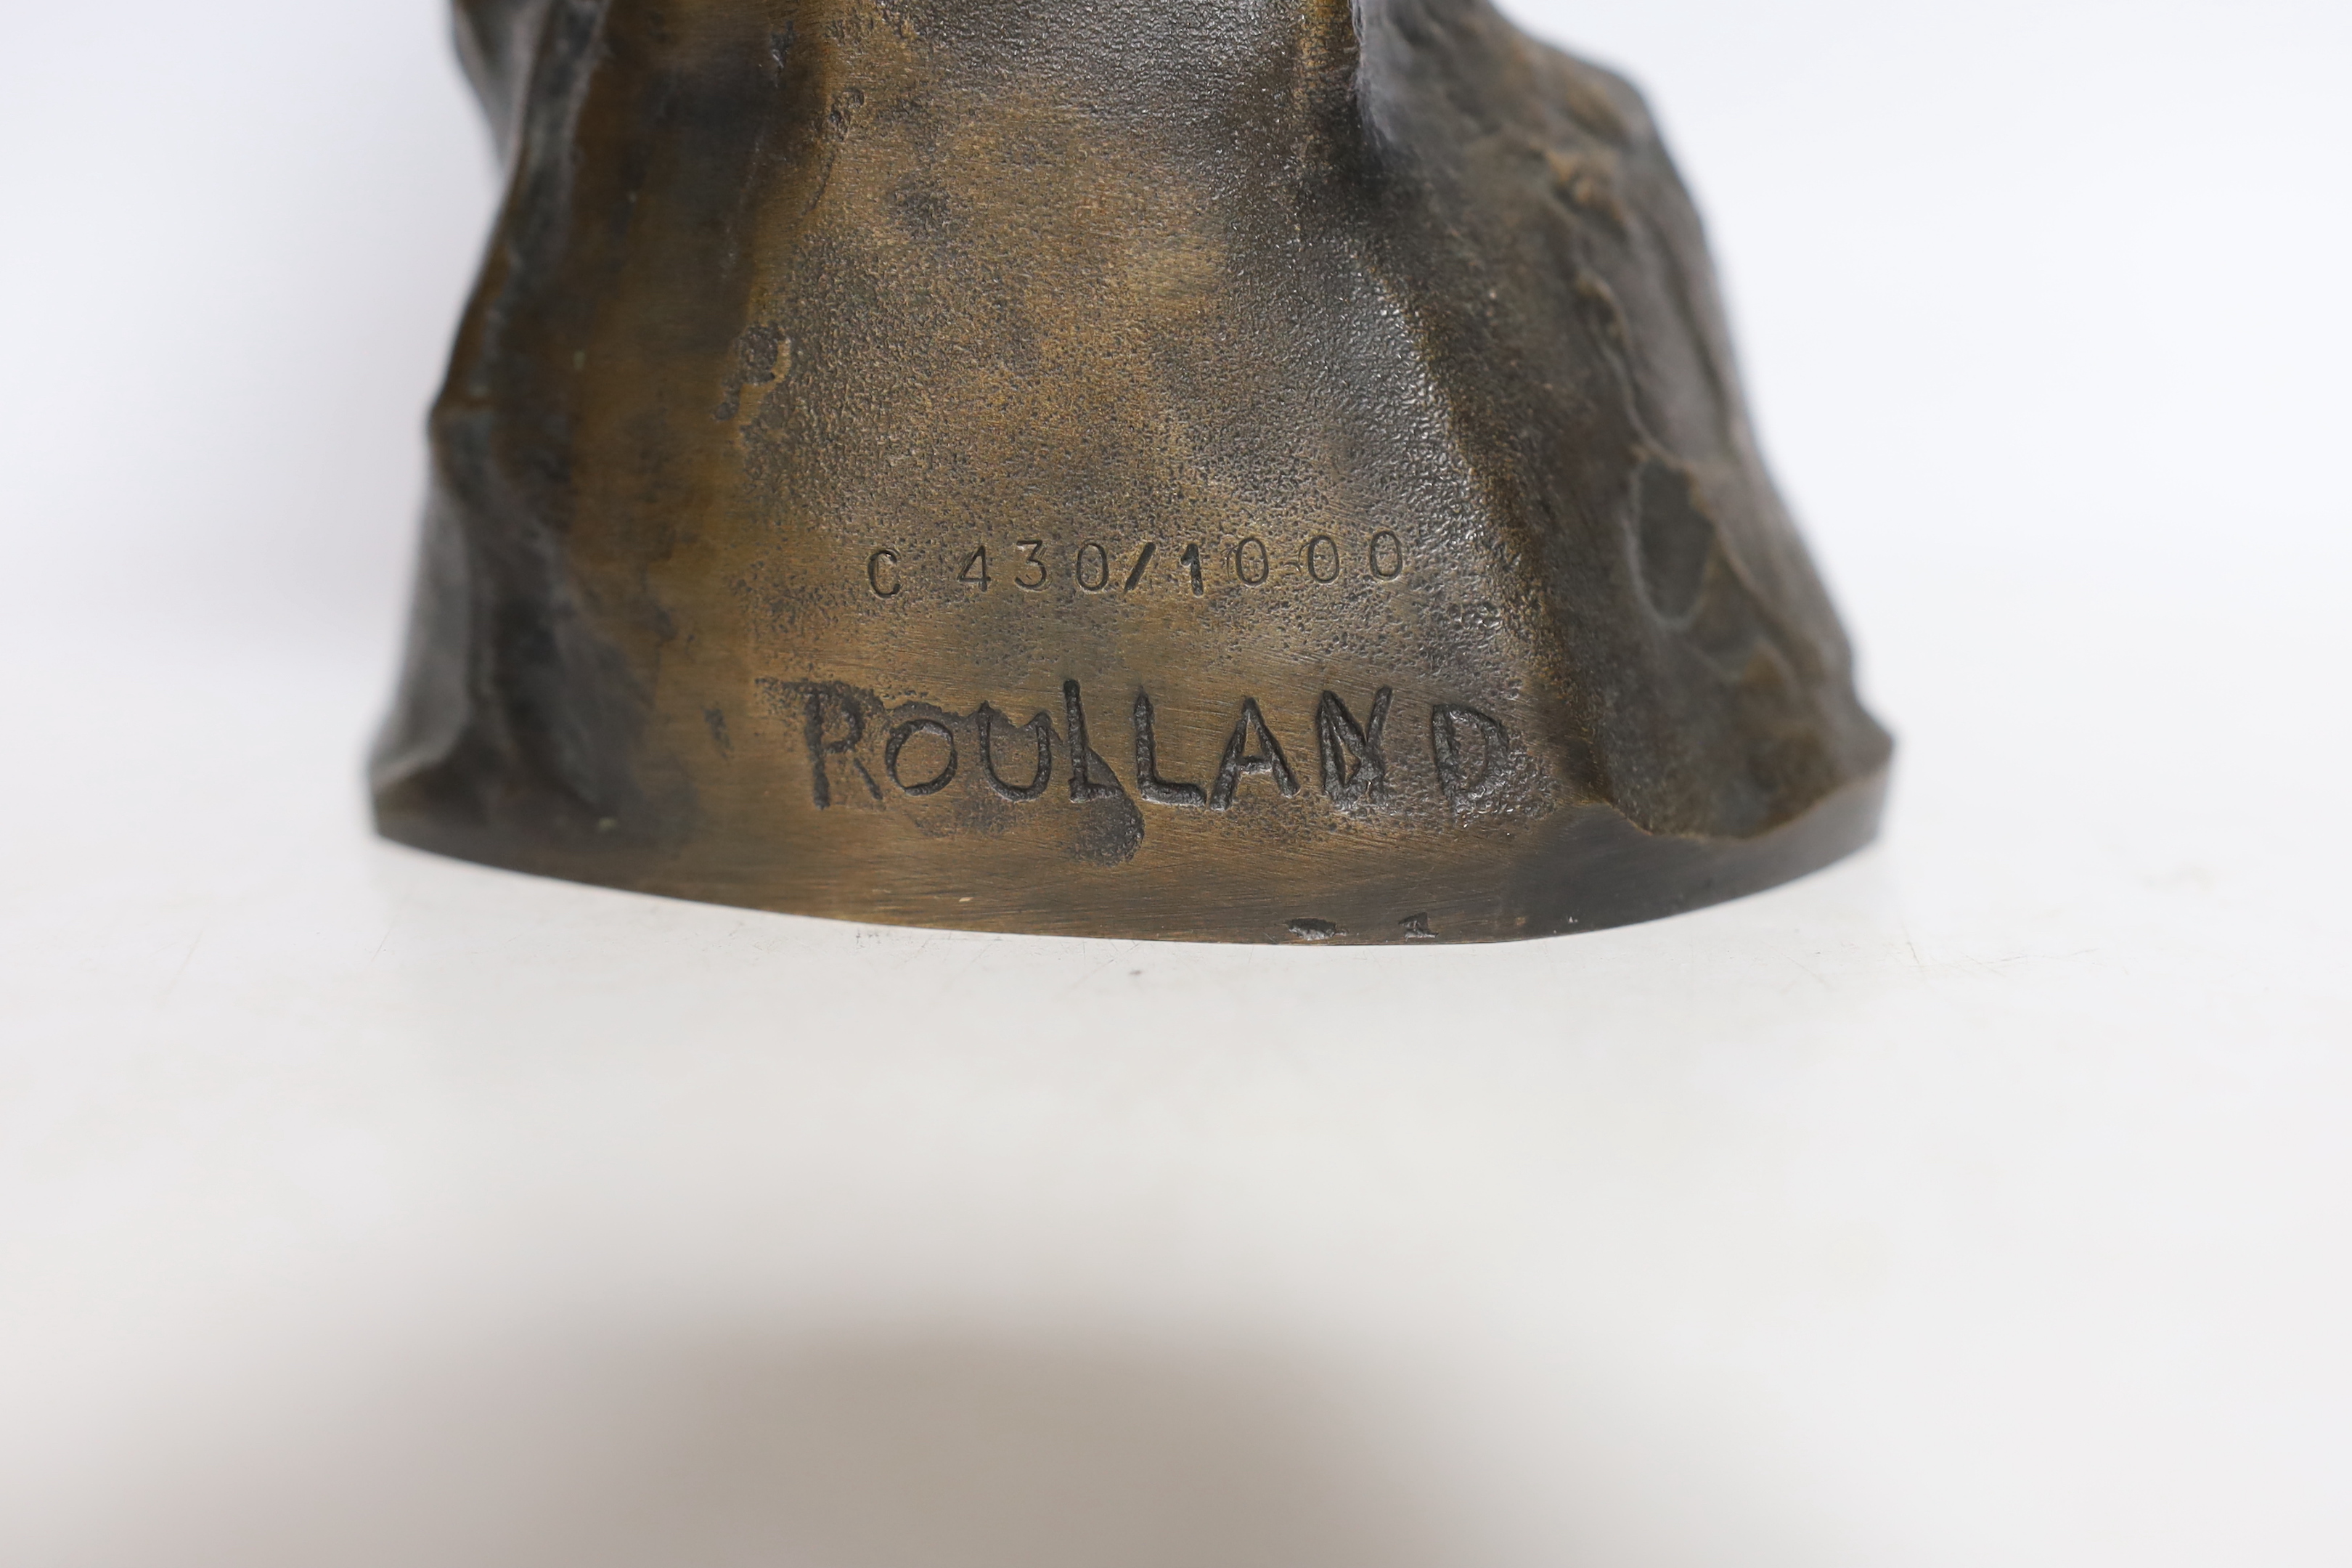 Jean Roulland (1931-2021), a bronze bust of Hippocrate, numbered 400/1000